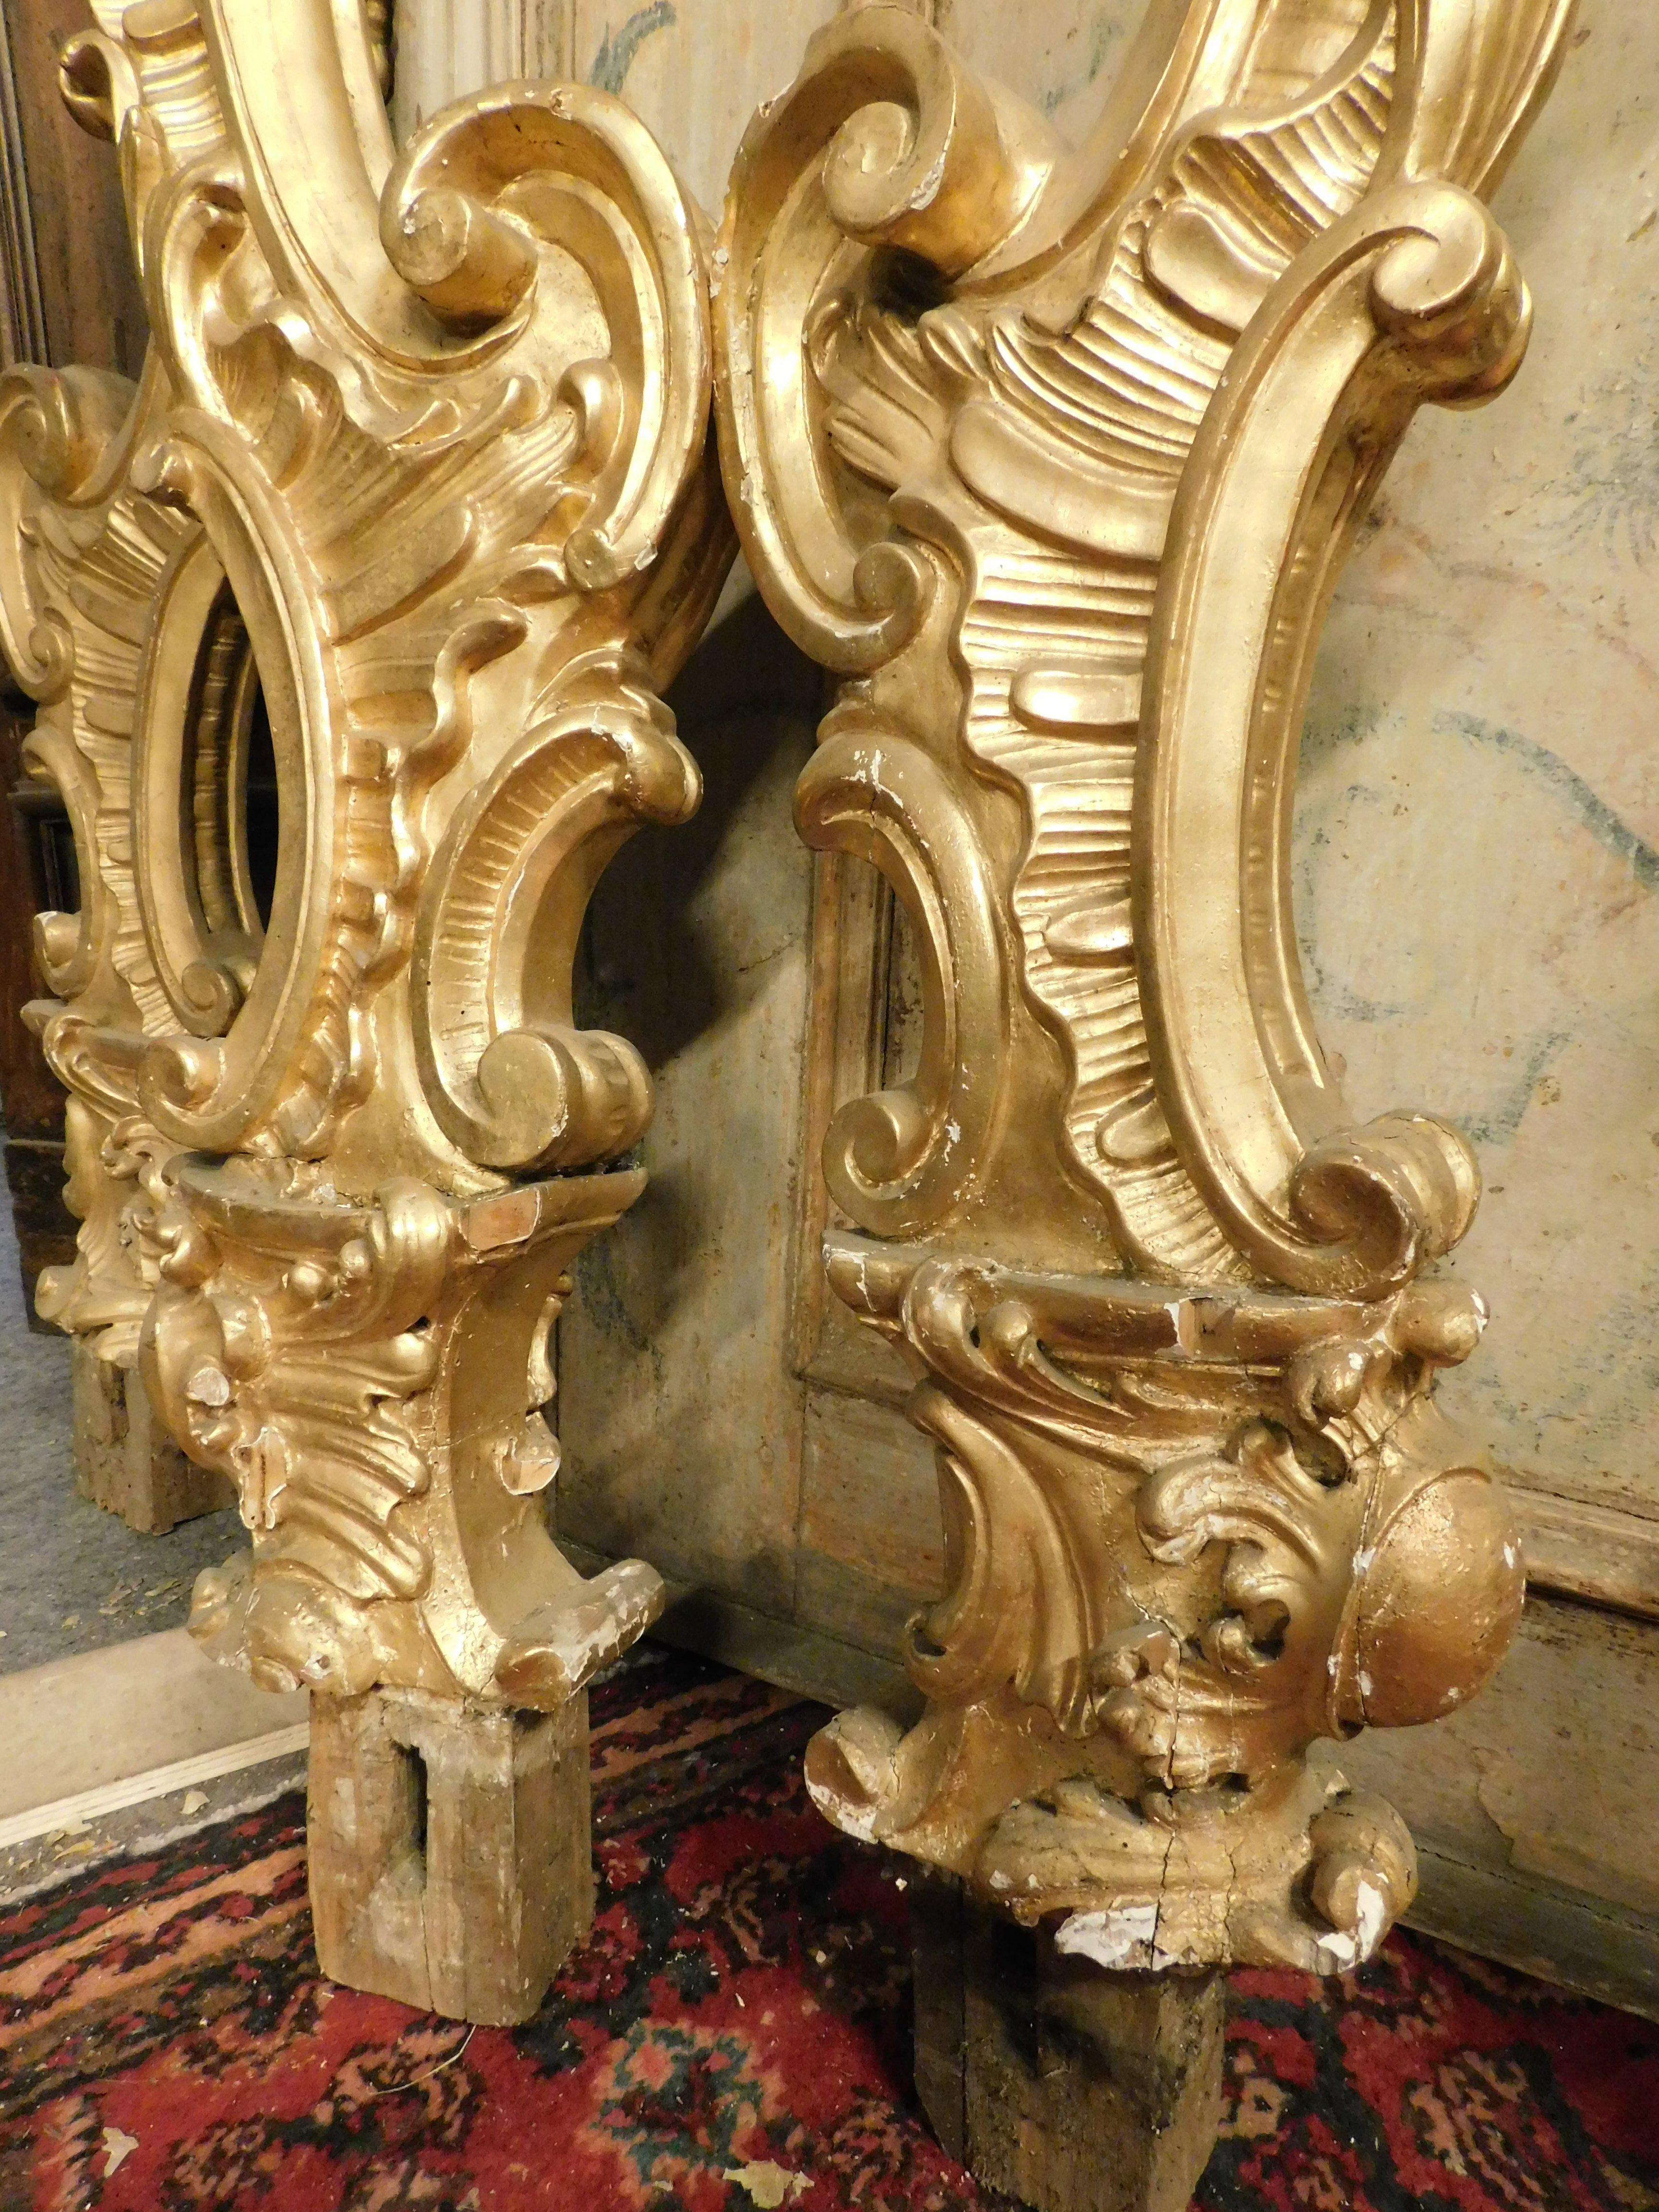 Poplar n.4 pilaster columns with cherubs, carved and gilded, Italy